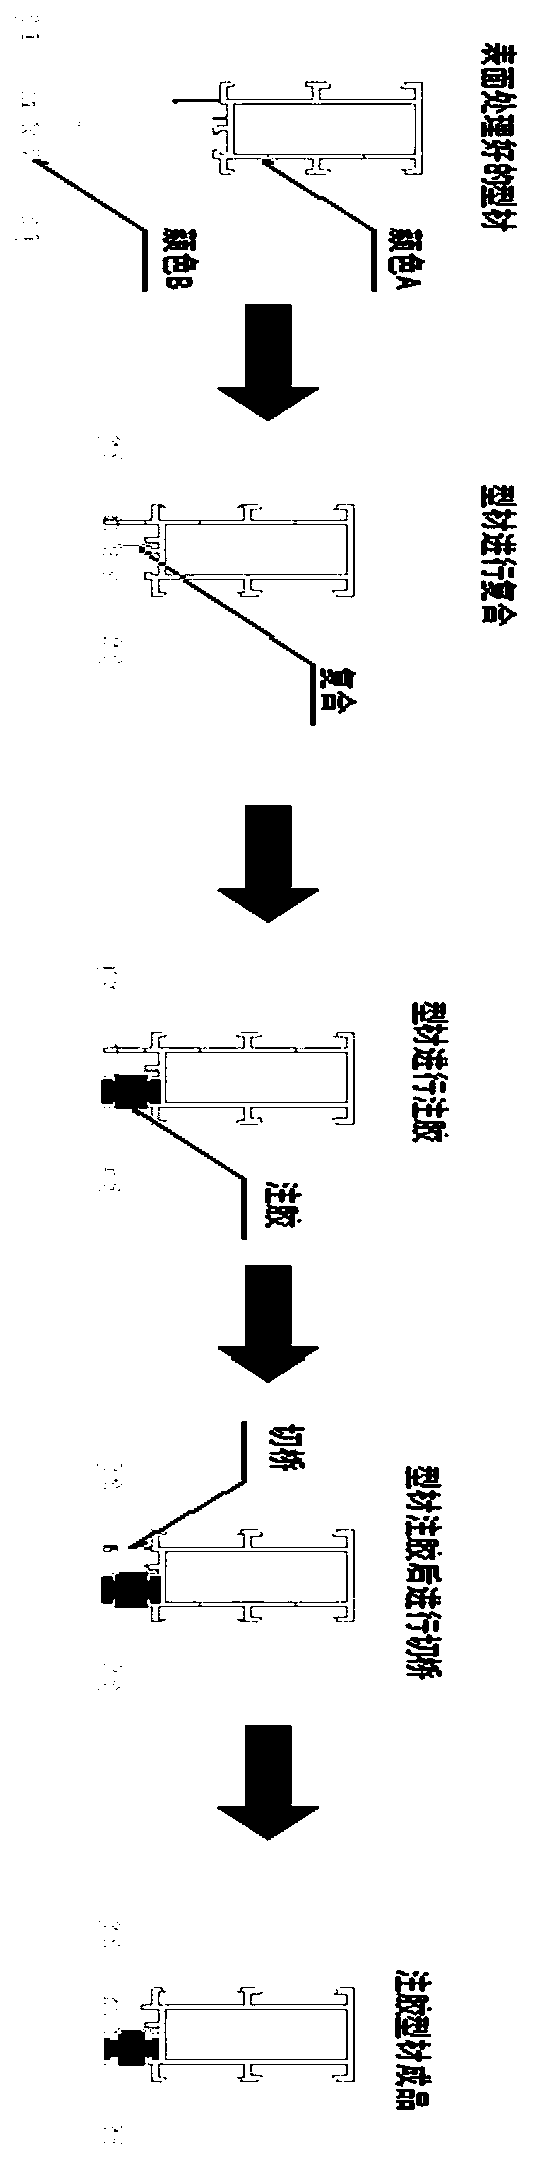 Sectional material bicolor glue injection method